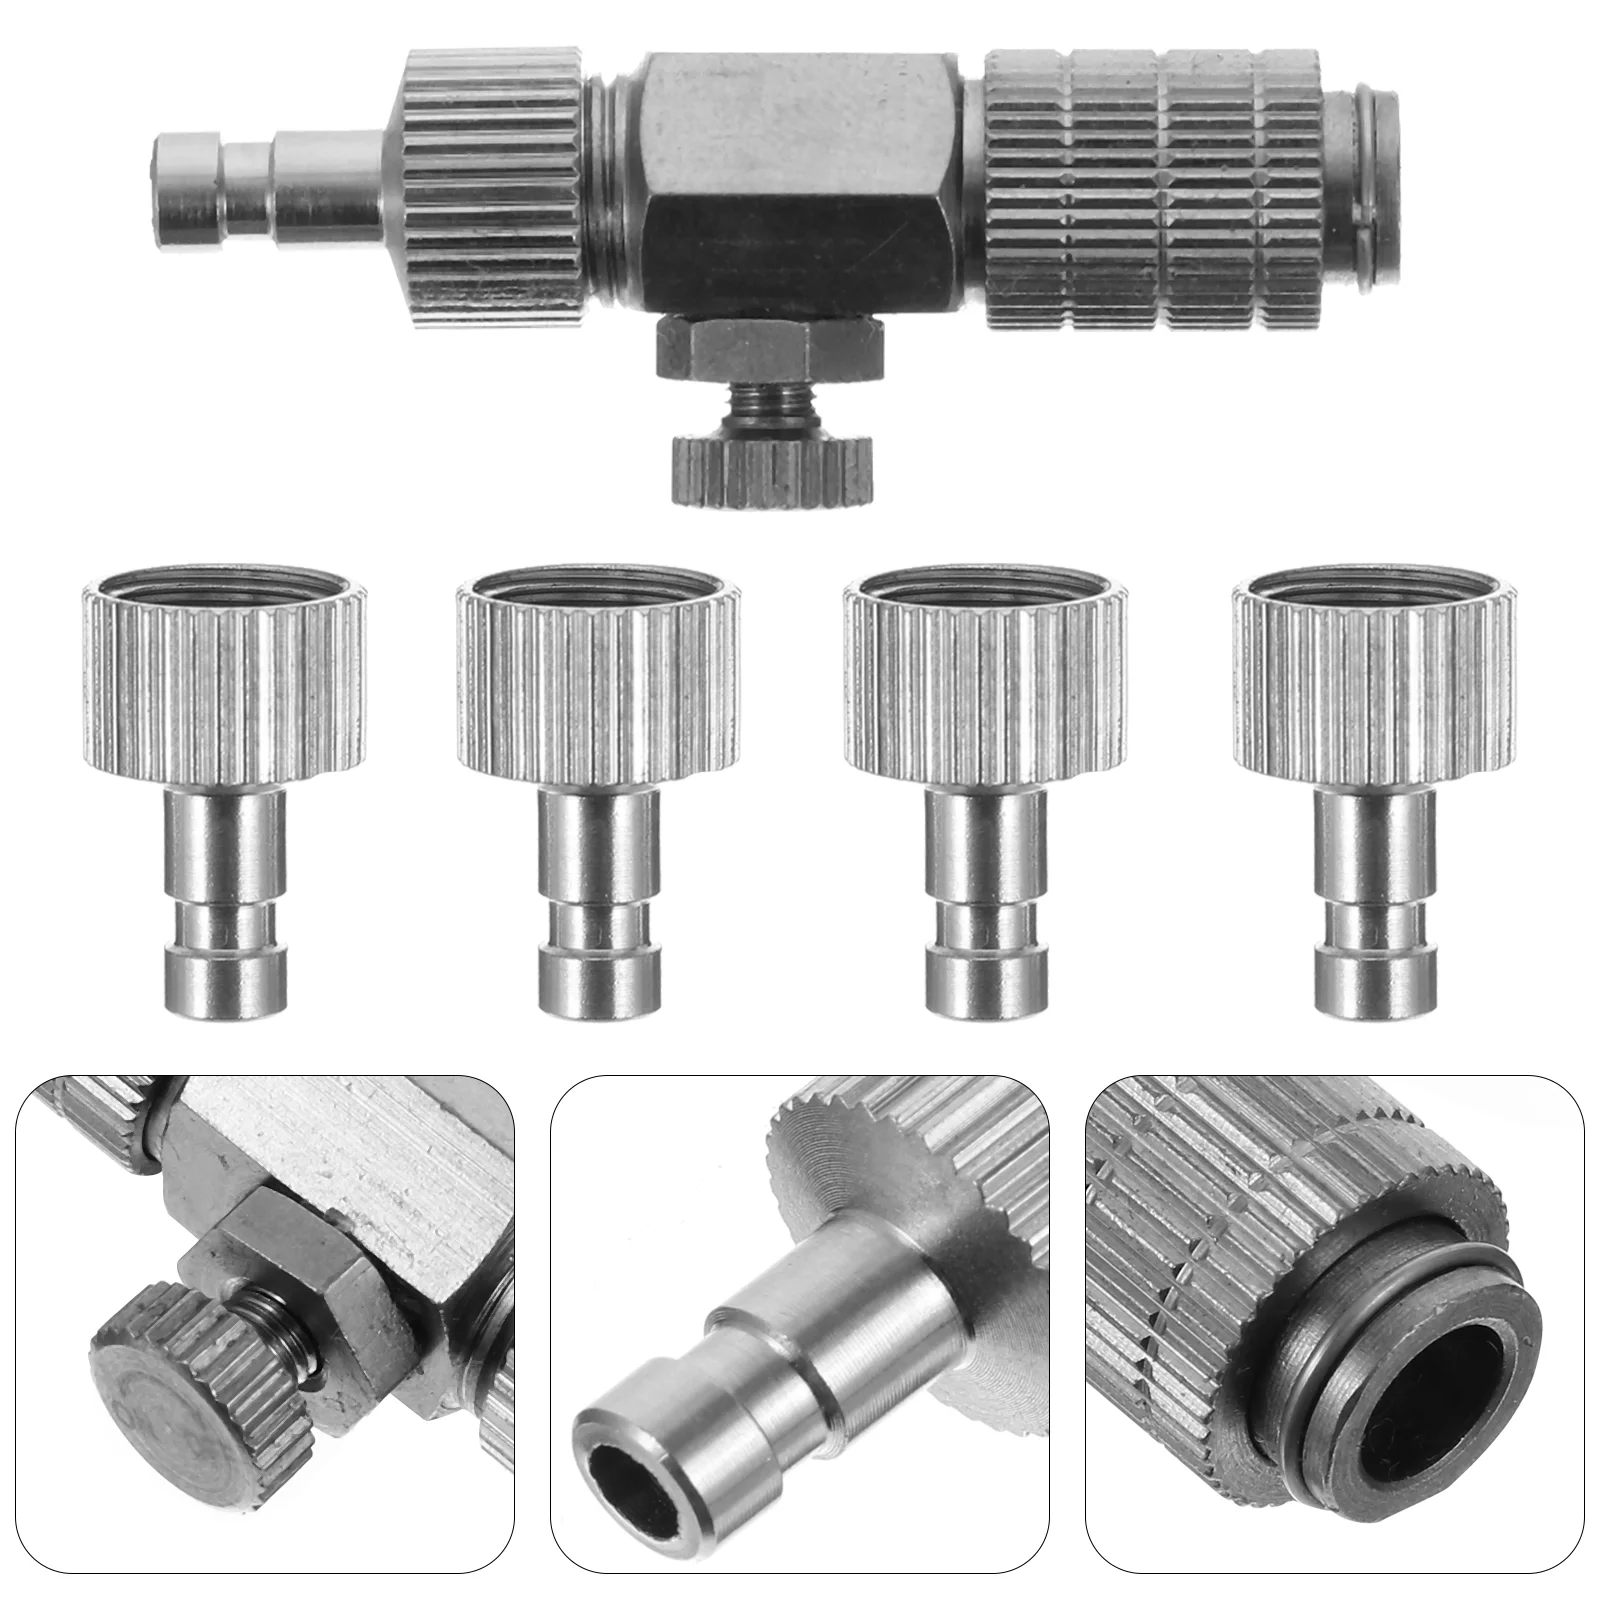 1 Set Airbrush Adapter Fittings Fitting Connector for Airbrush Hose Airbrush Quick Release Disconnect Airbrush Adapter Kit